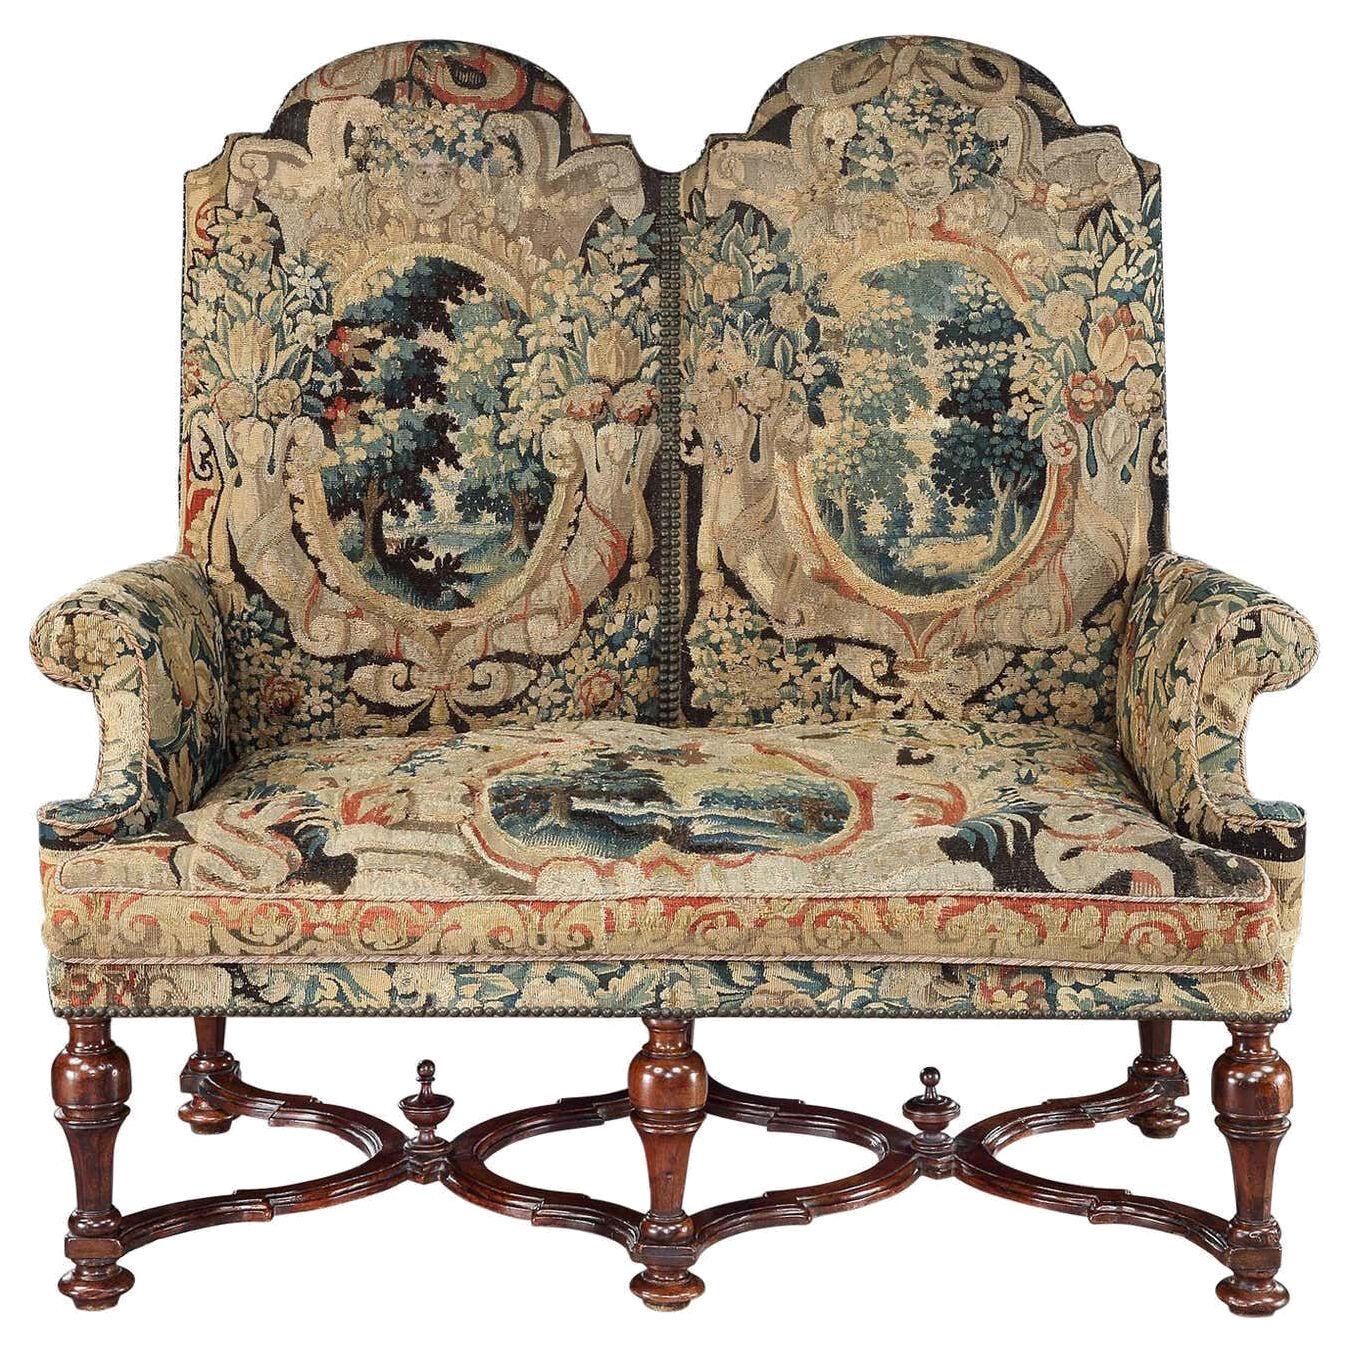 Settee, Sofa, Double-Chair Back, Brussels Tapestry, X-Stretcher, Walnut, 1700